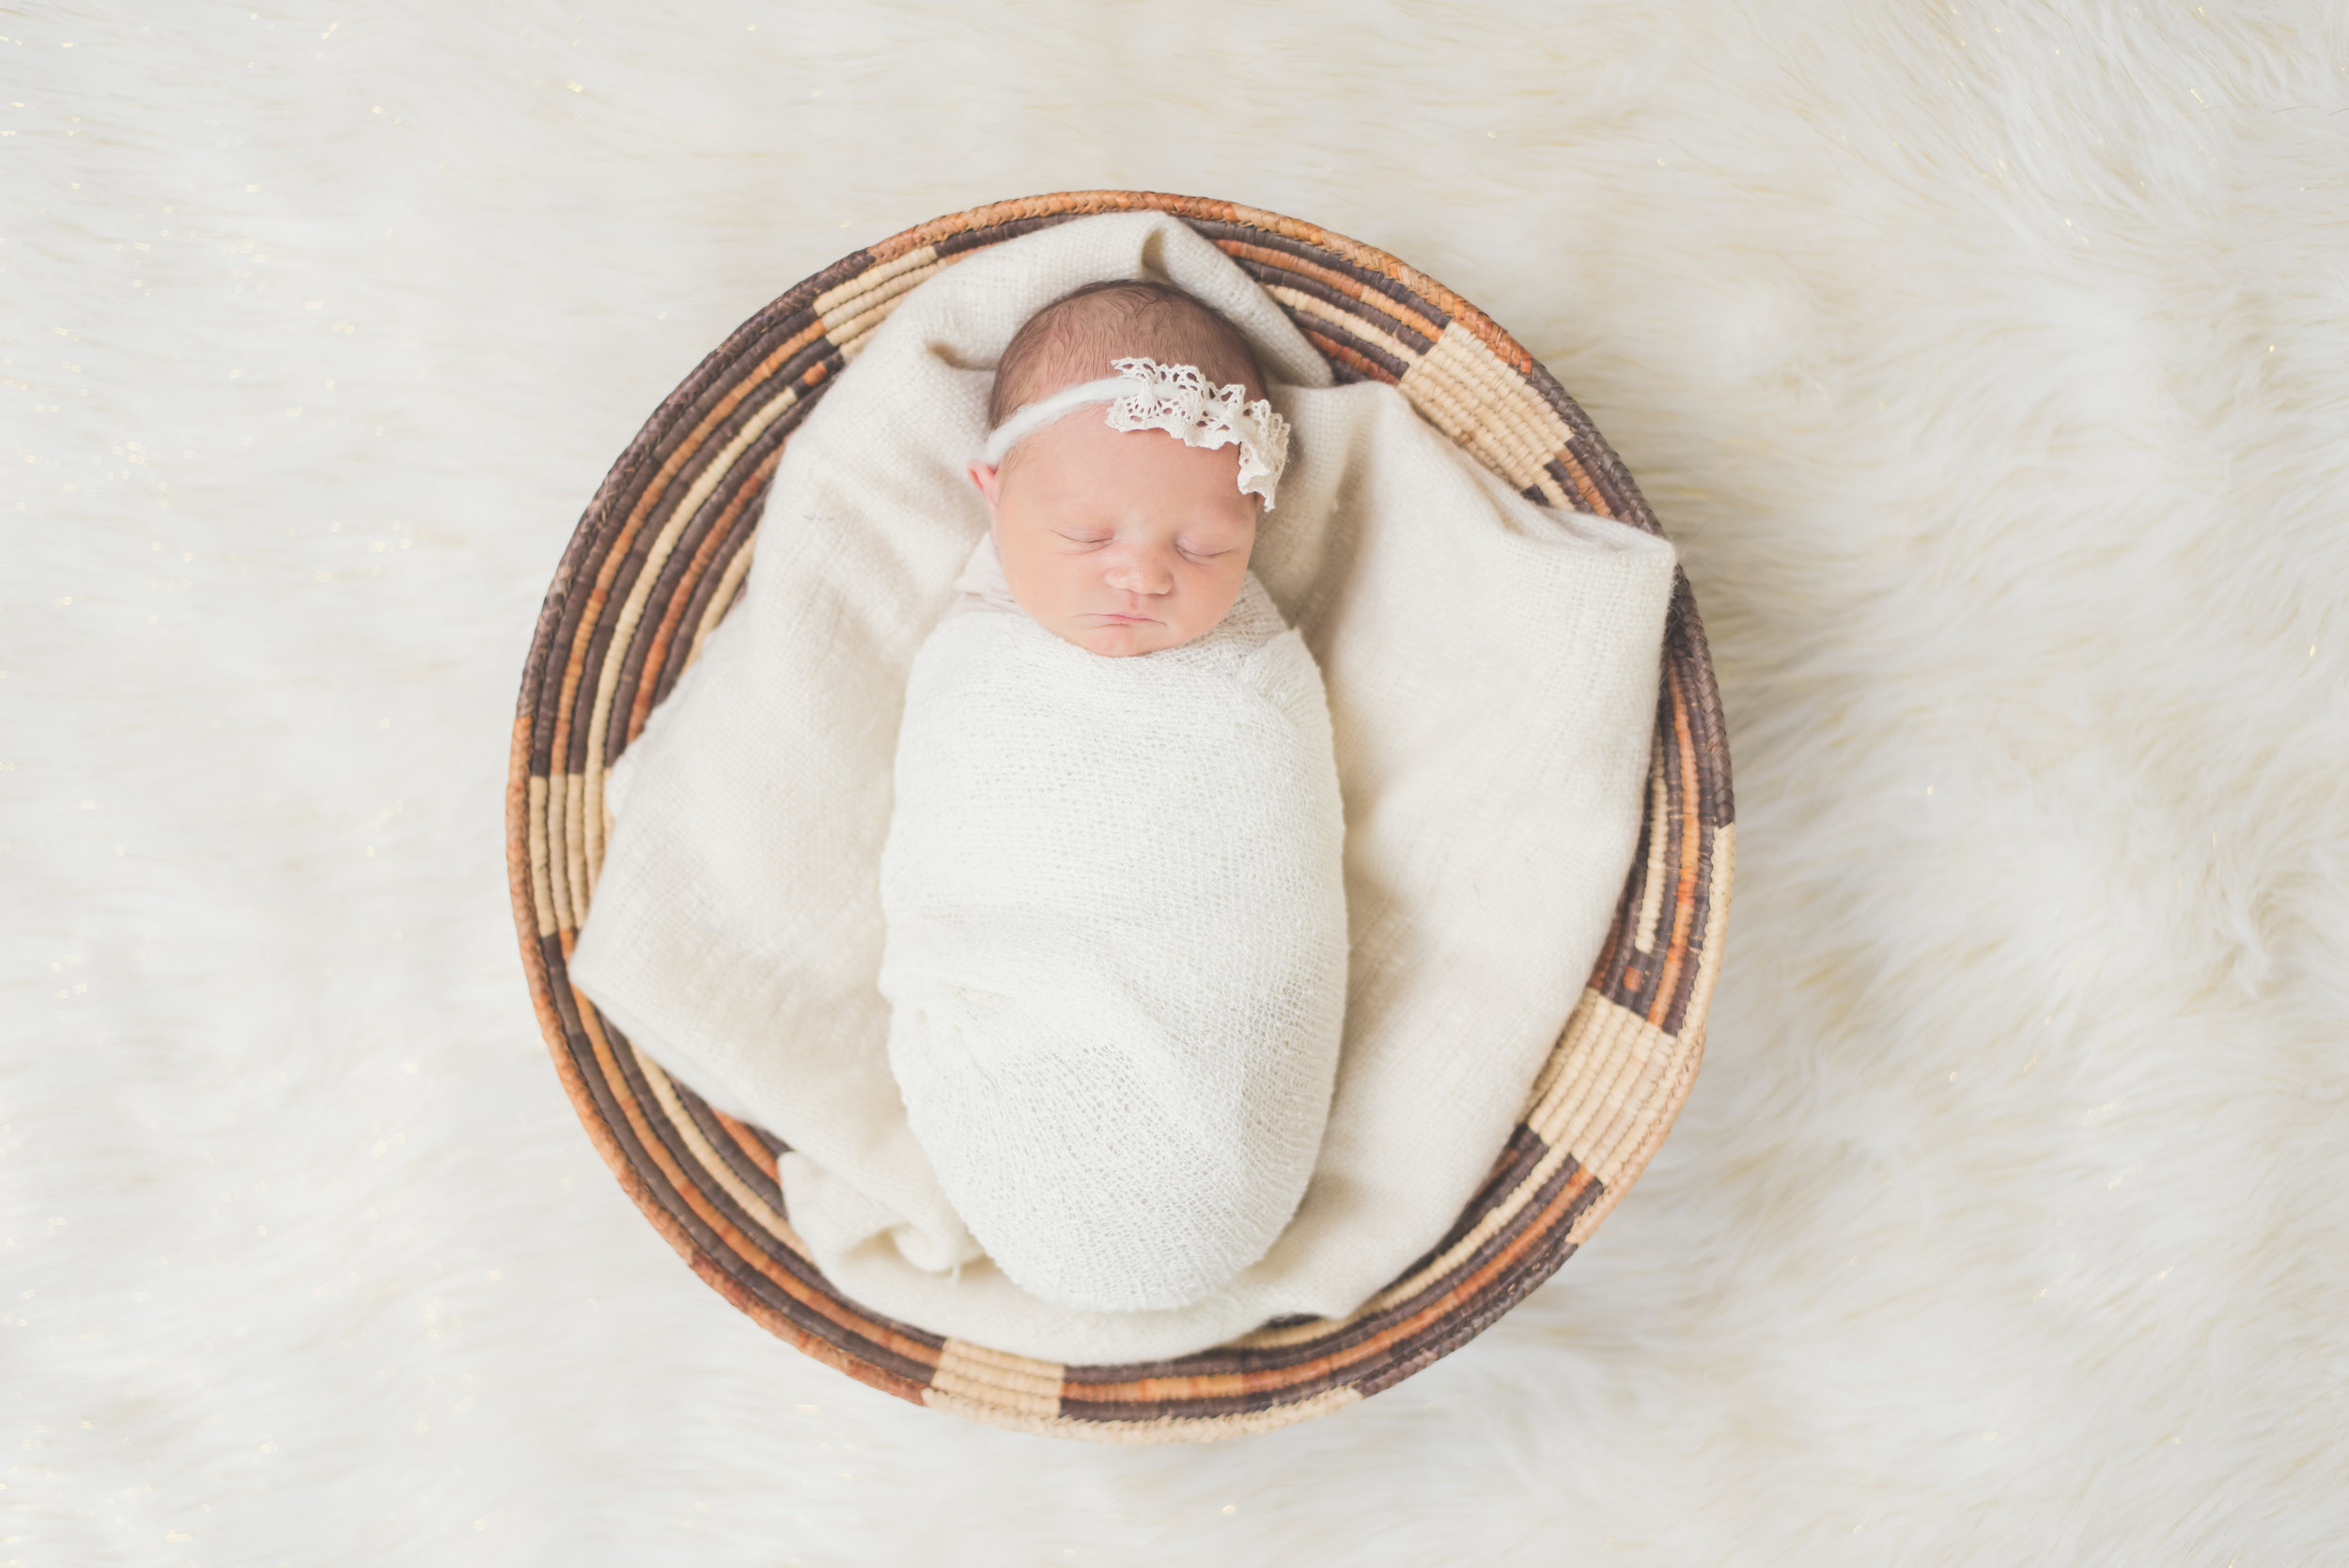 Copy of photos by Ariel- newborn in basket from above 